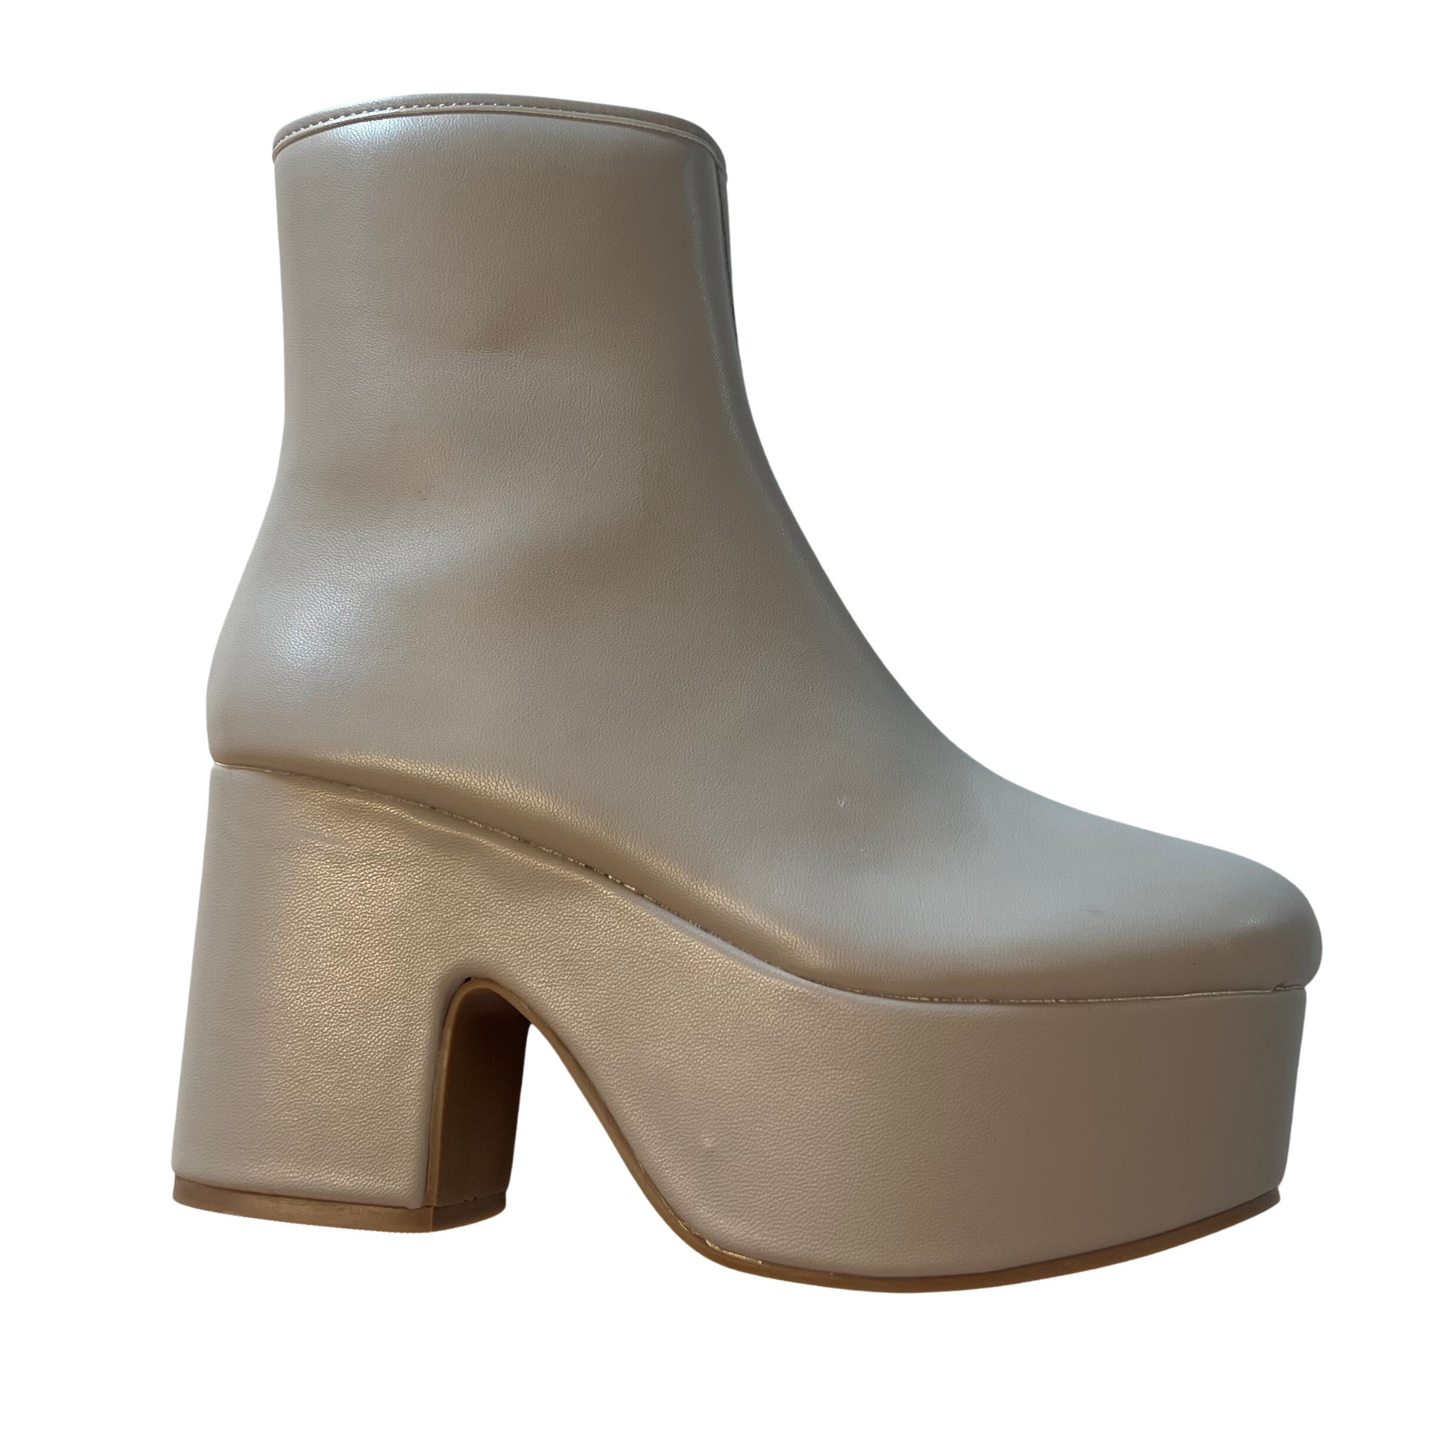 The Xiva by Shushop features a mink color platform bootie that stands out in any outfit. Its durable construction ensures long-lasting comfort, and the zip up design ensures a secure fit for all-day use. Whether you're looking for a stylish statement or a comfortable everyday shoe, the Xiva checks all the boxes.